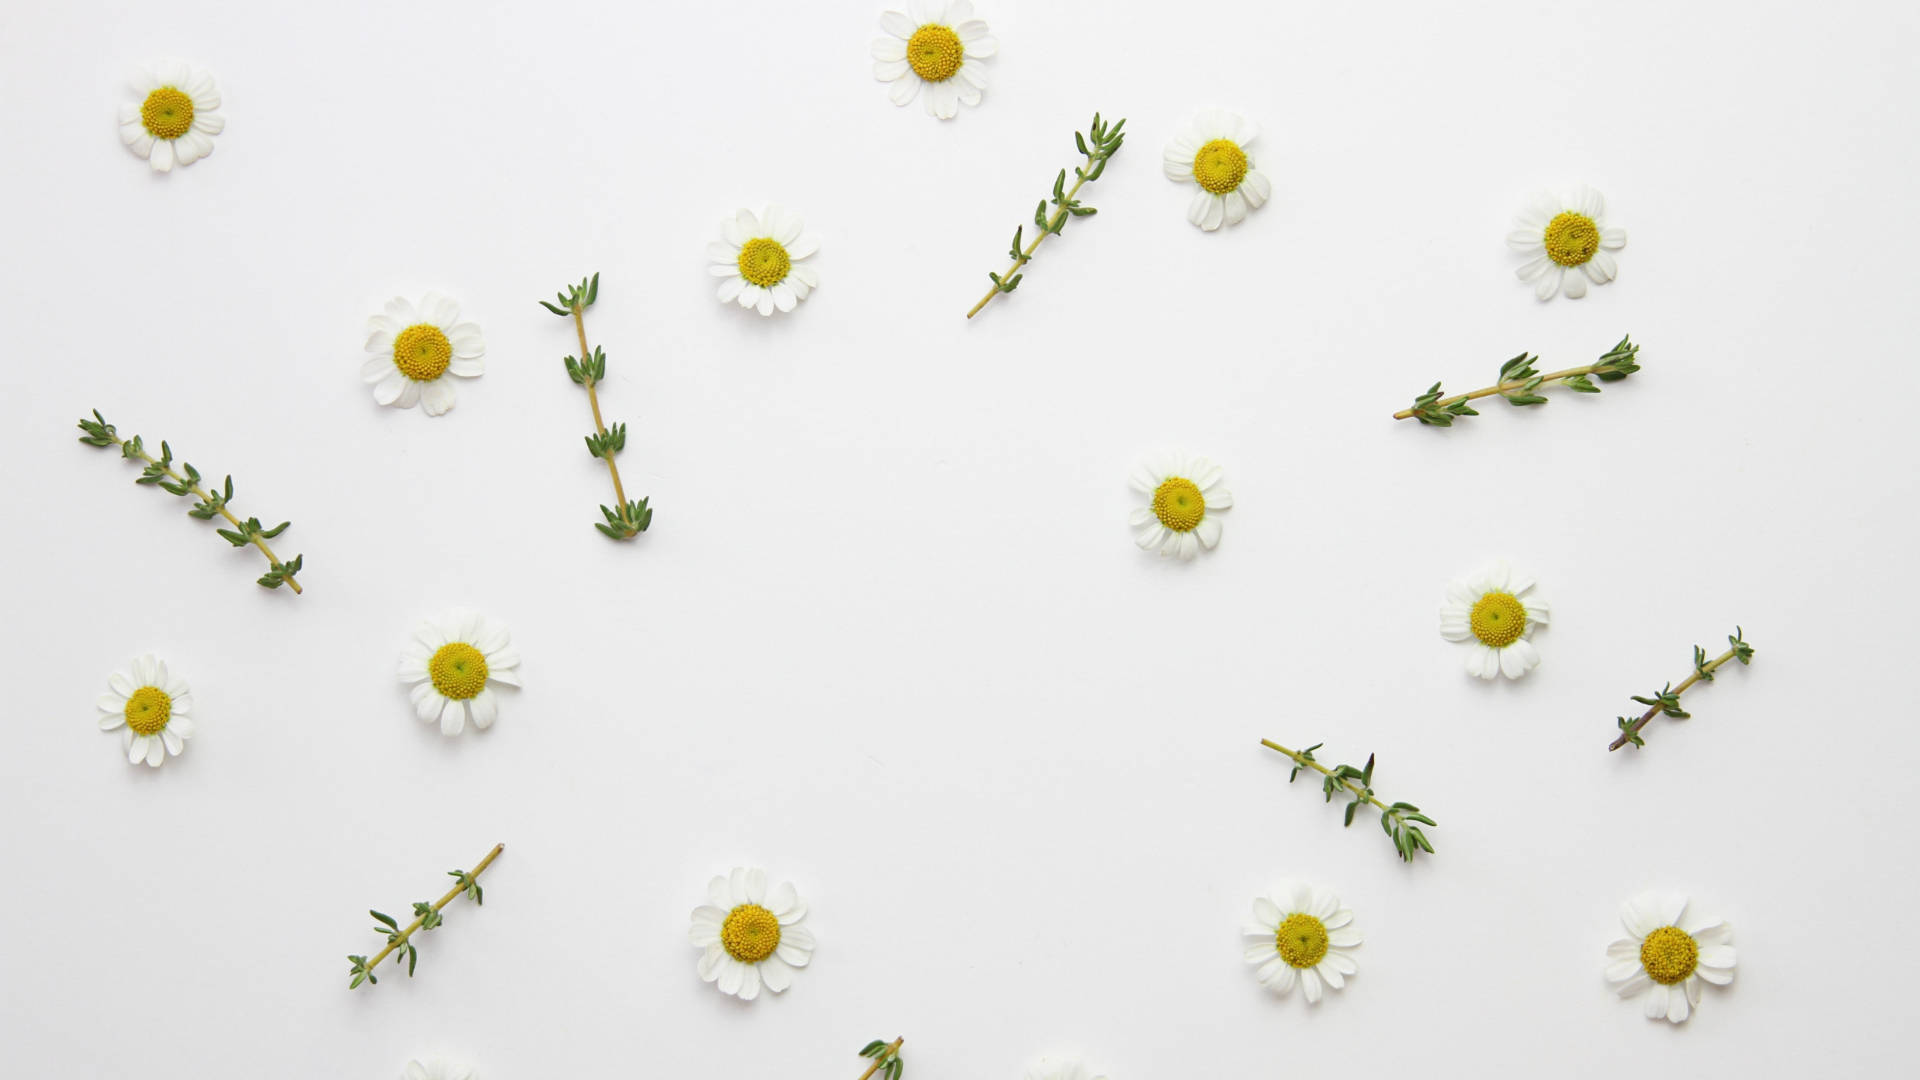 Little Daisy Flower With Thyme Leaves Background